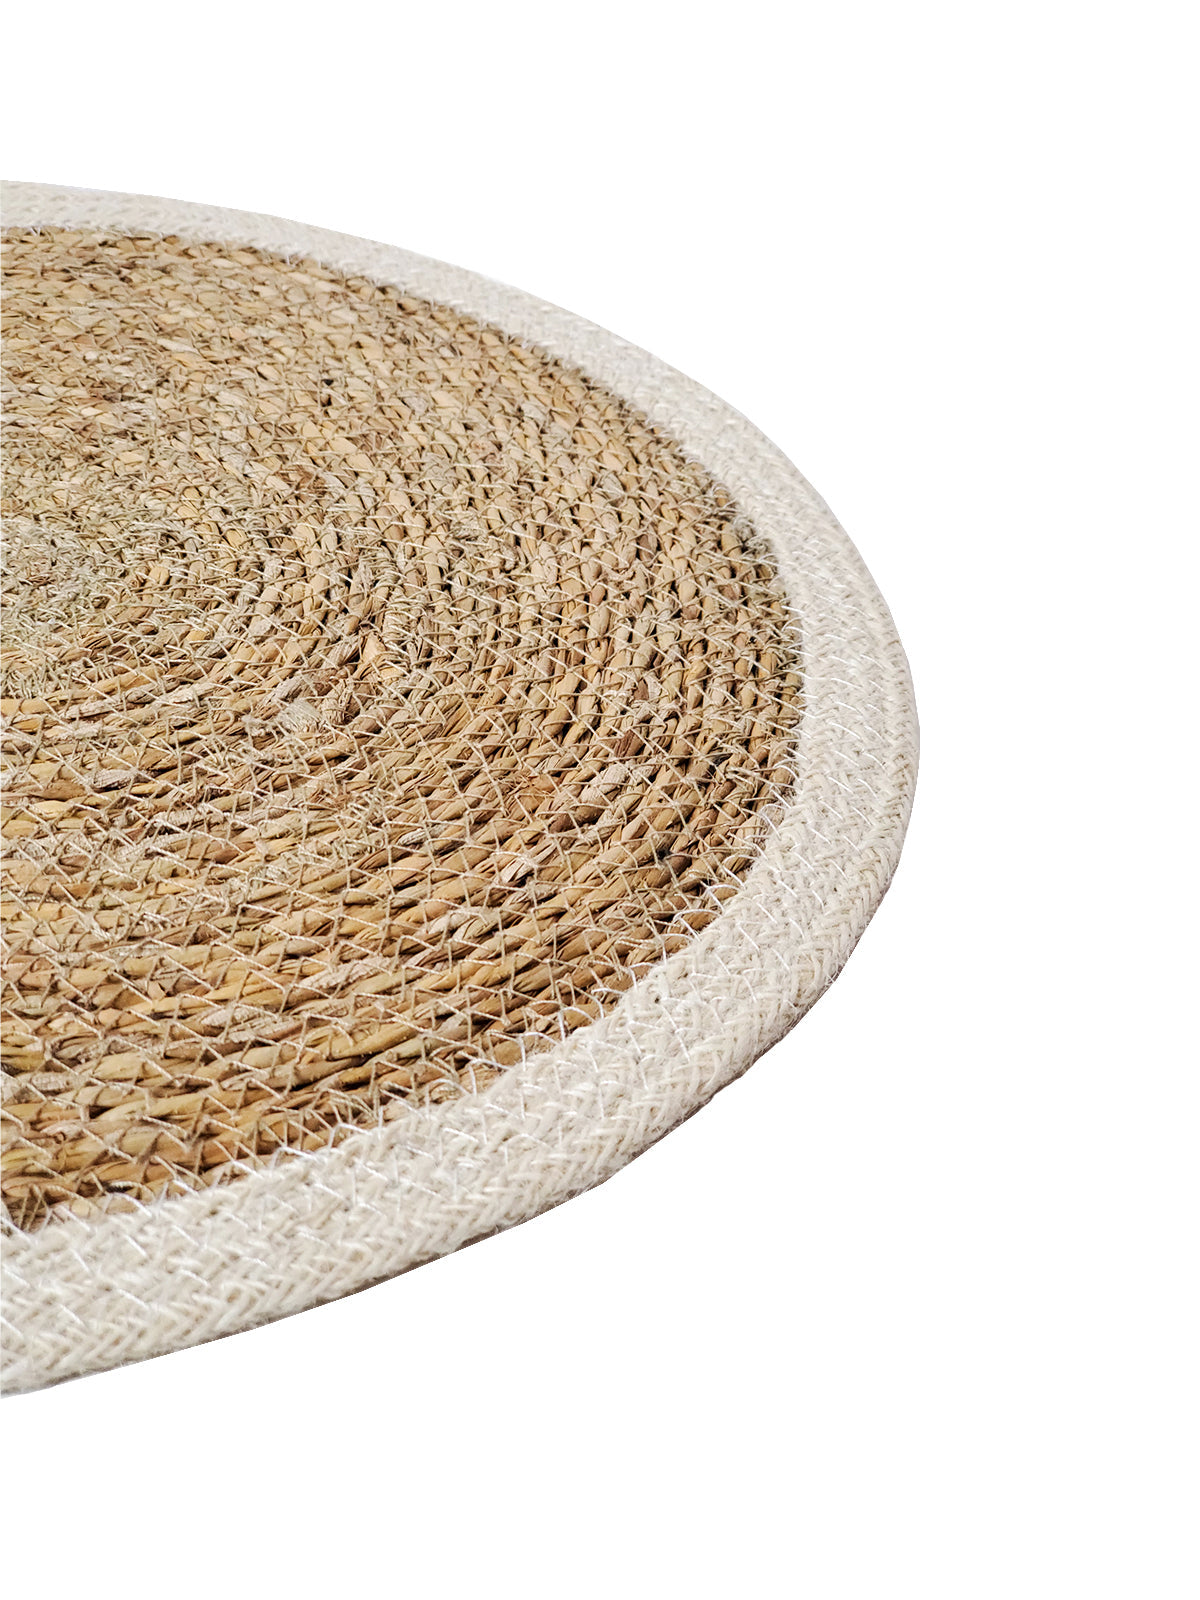 Natural textures and neutral color seagrass placemat